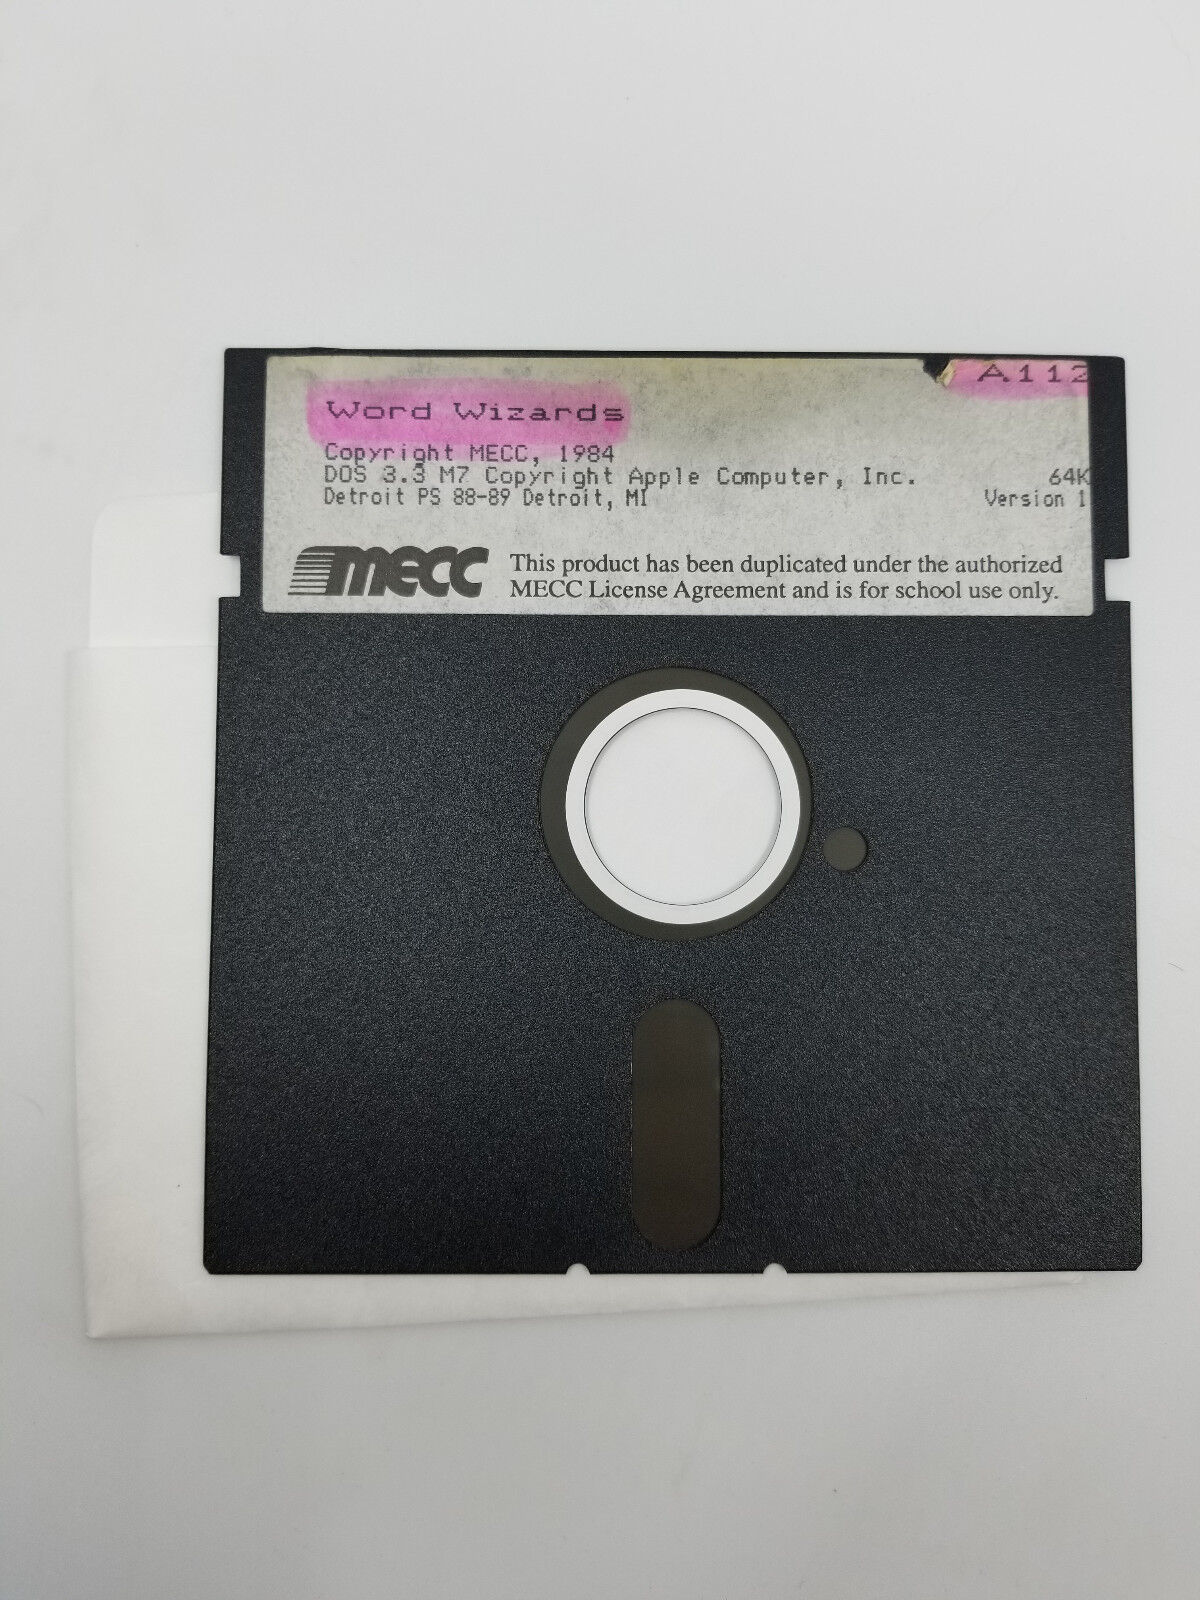 Word Wizzards Disk by MECC for Apple II Plus, Apple IIe, Apple IIc, IGS A112